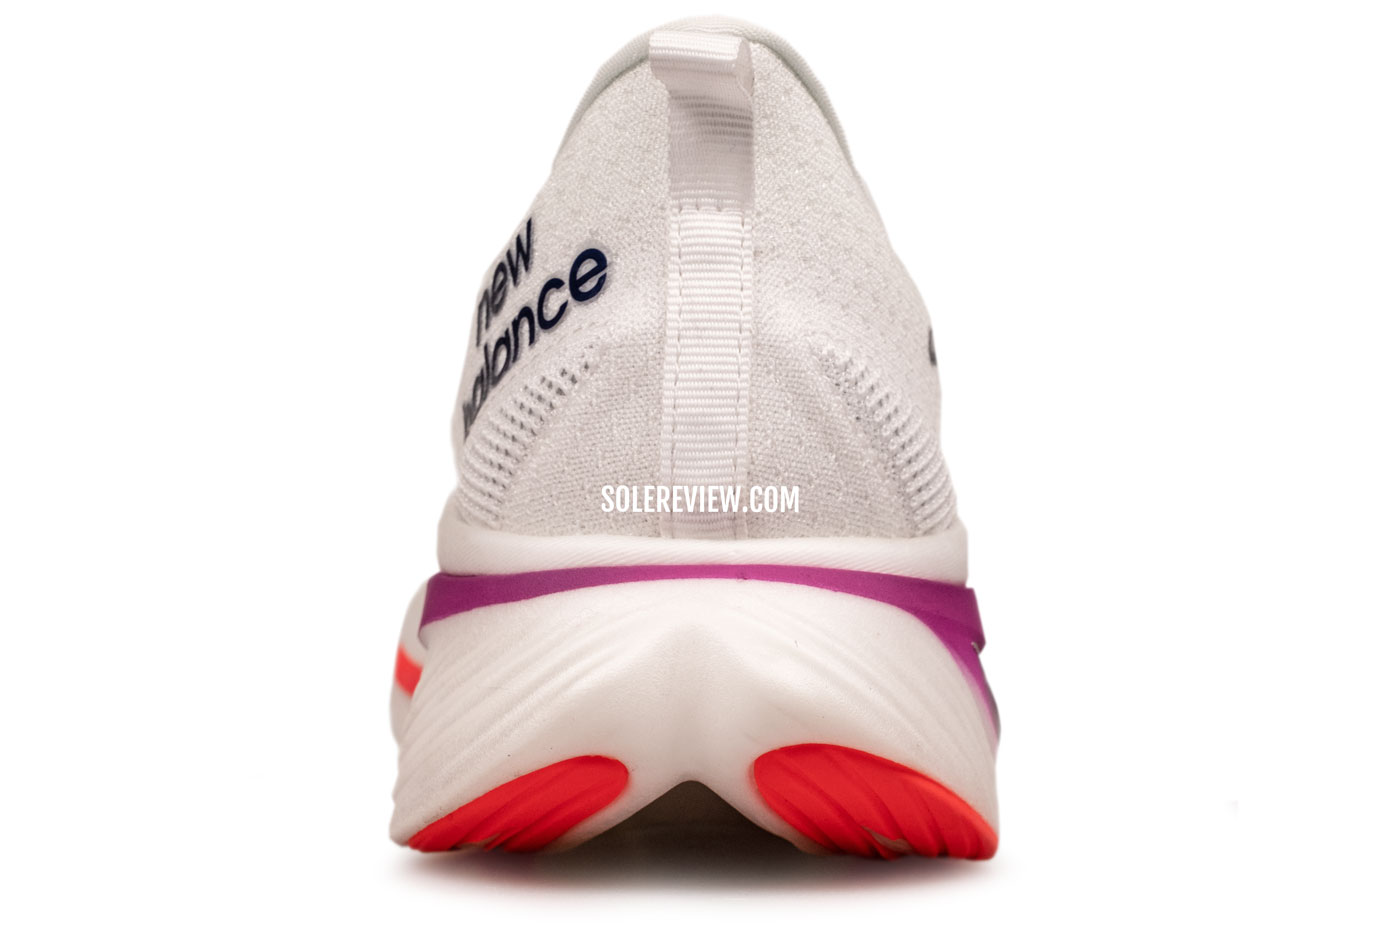 The heel view of the New Balance SC Elite V3.